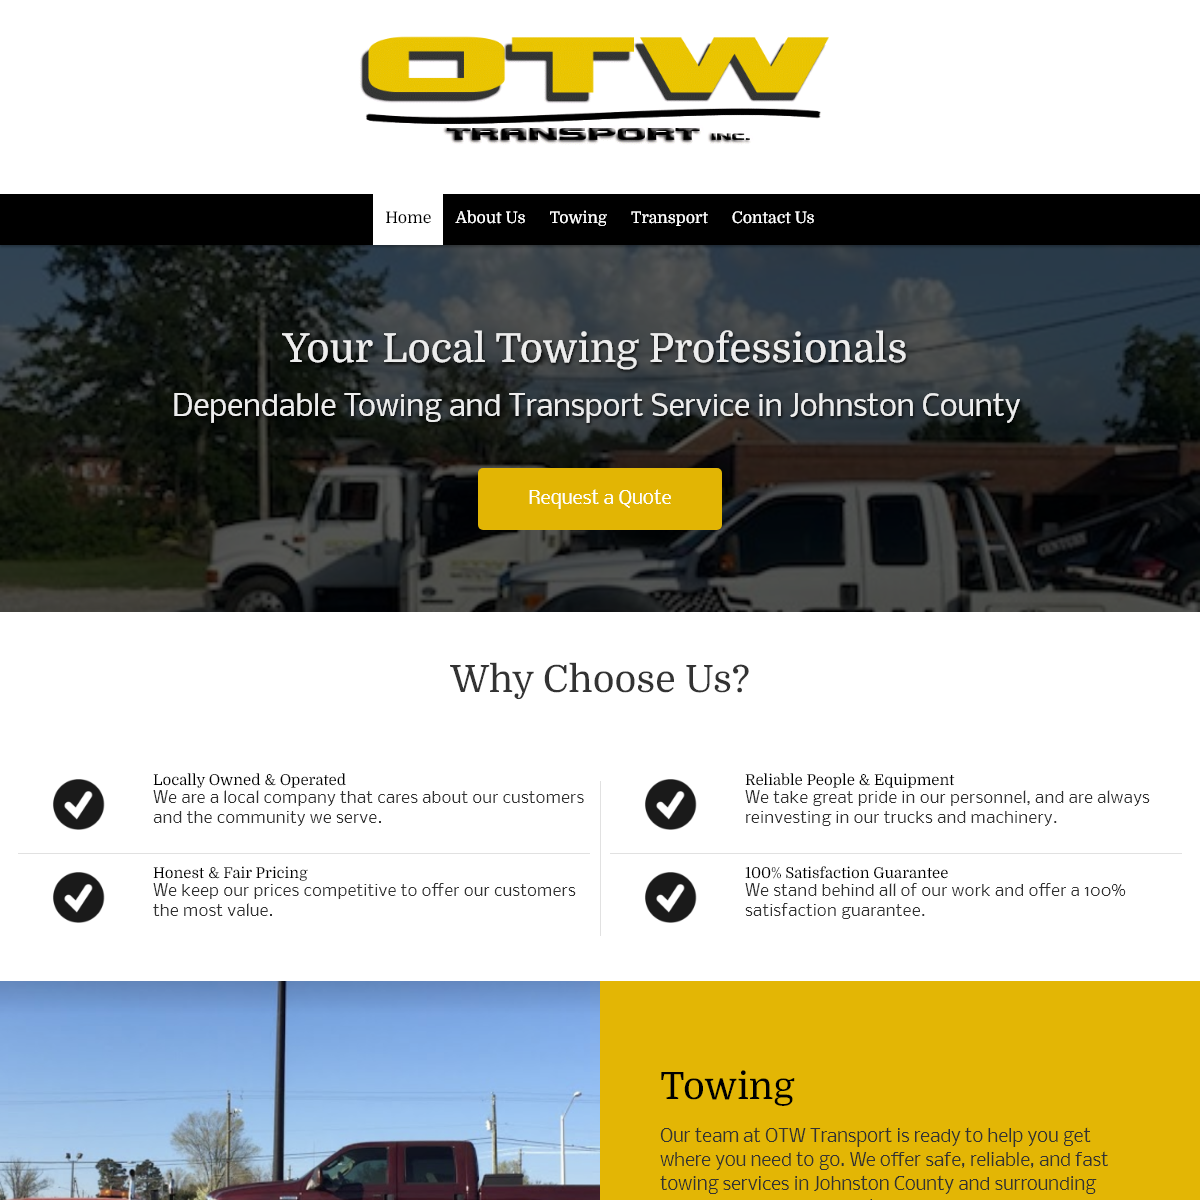 Dependable Towing and Transport Service in Johnston County - OTW Transport, Inc